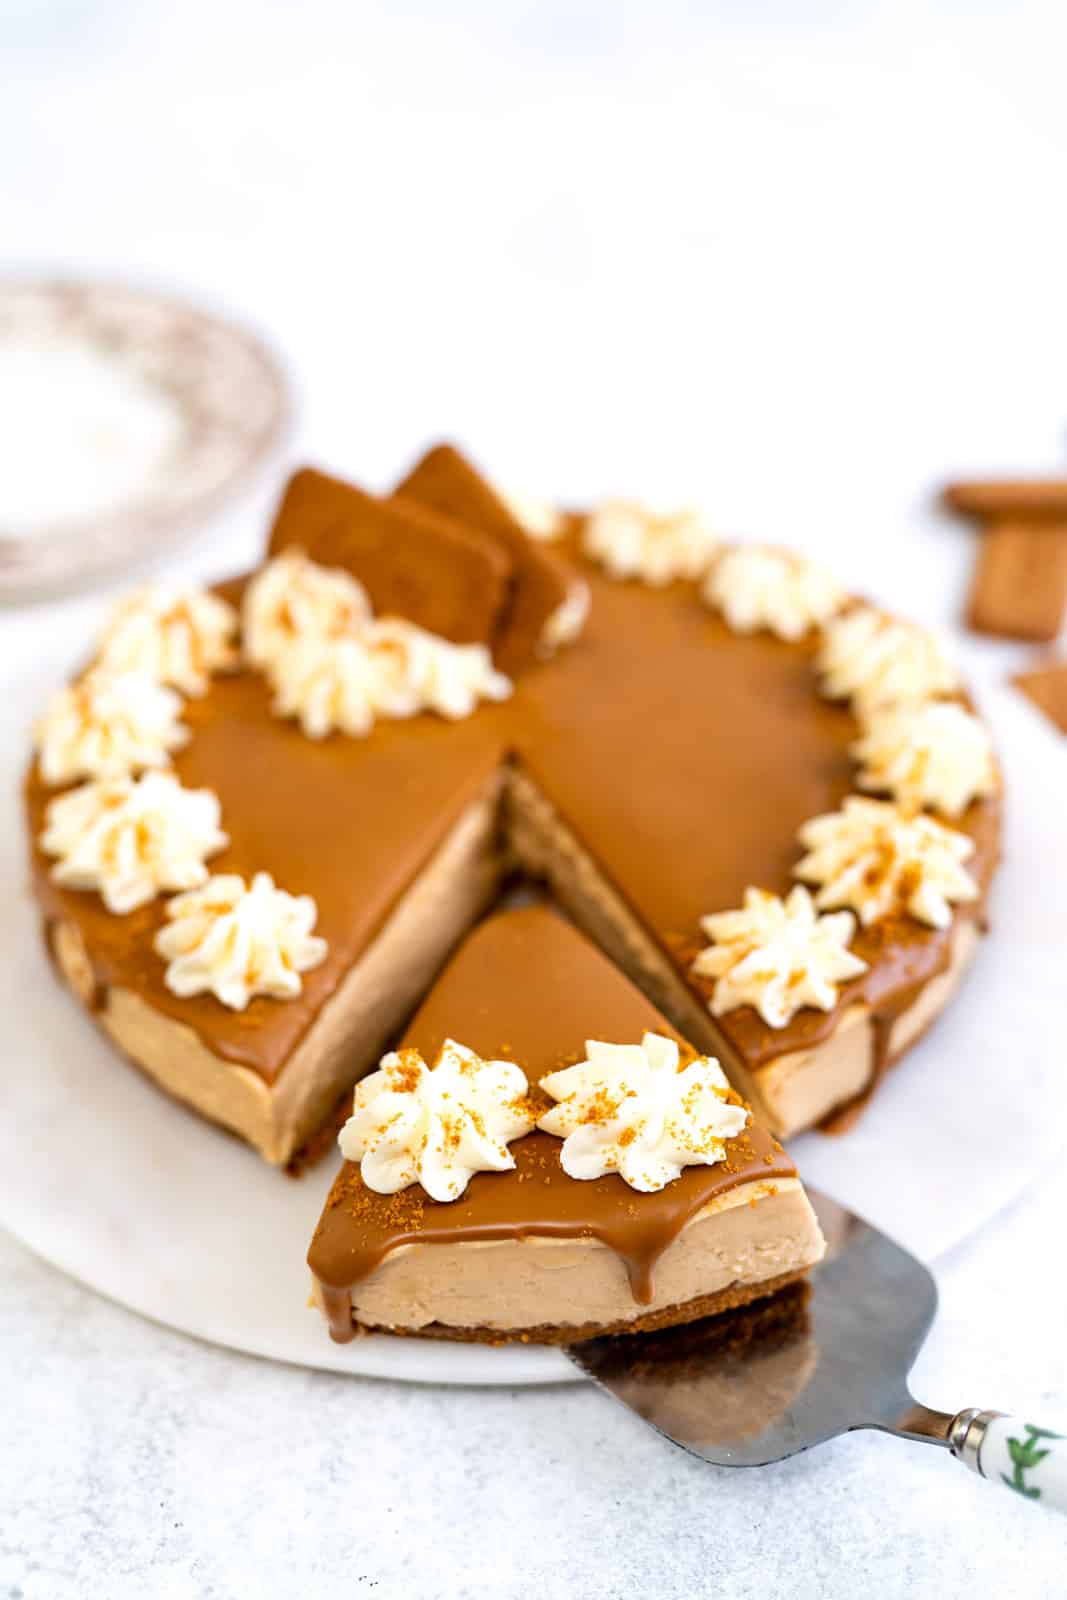 Taking a slice out of a no bake Biscoff cheesecake